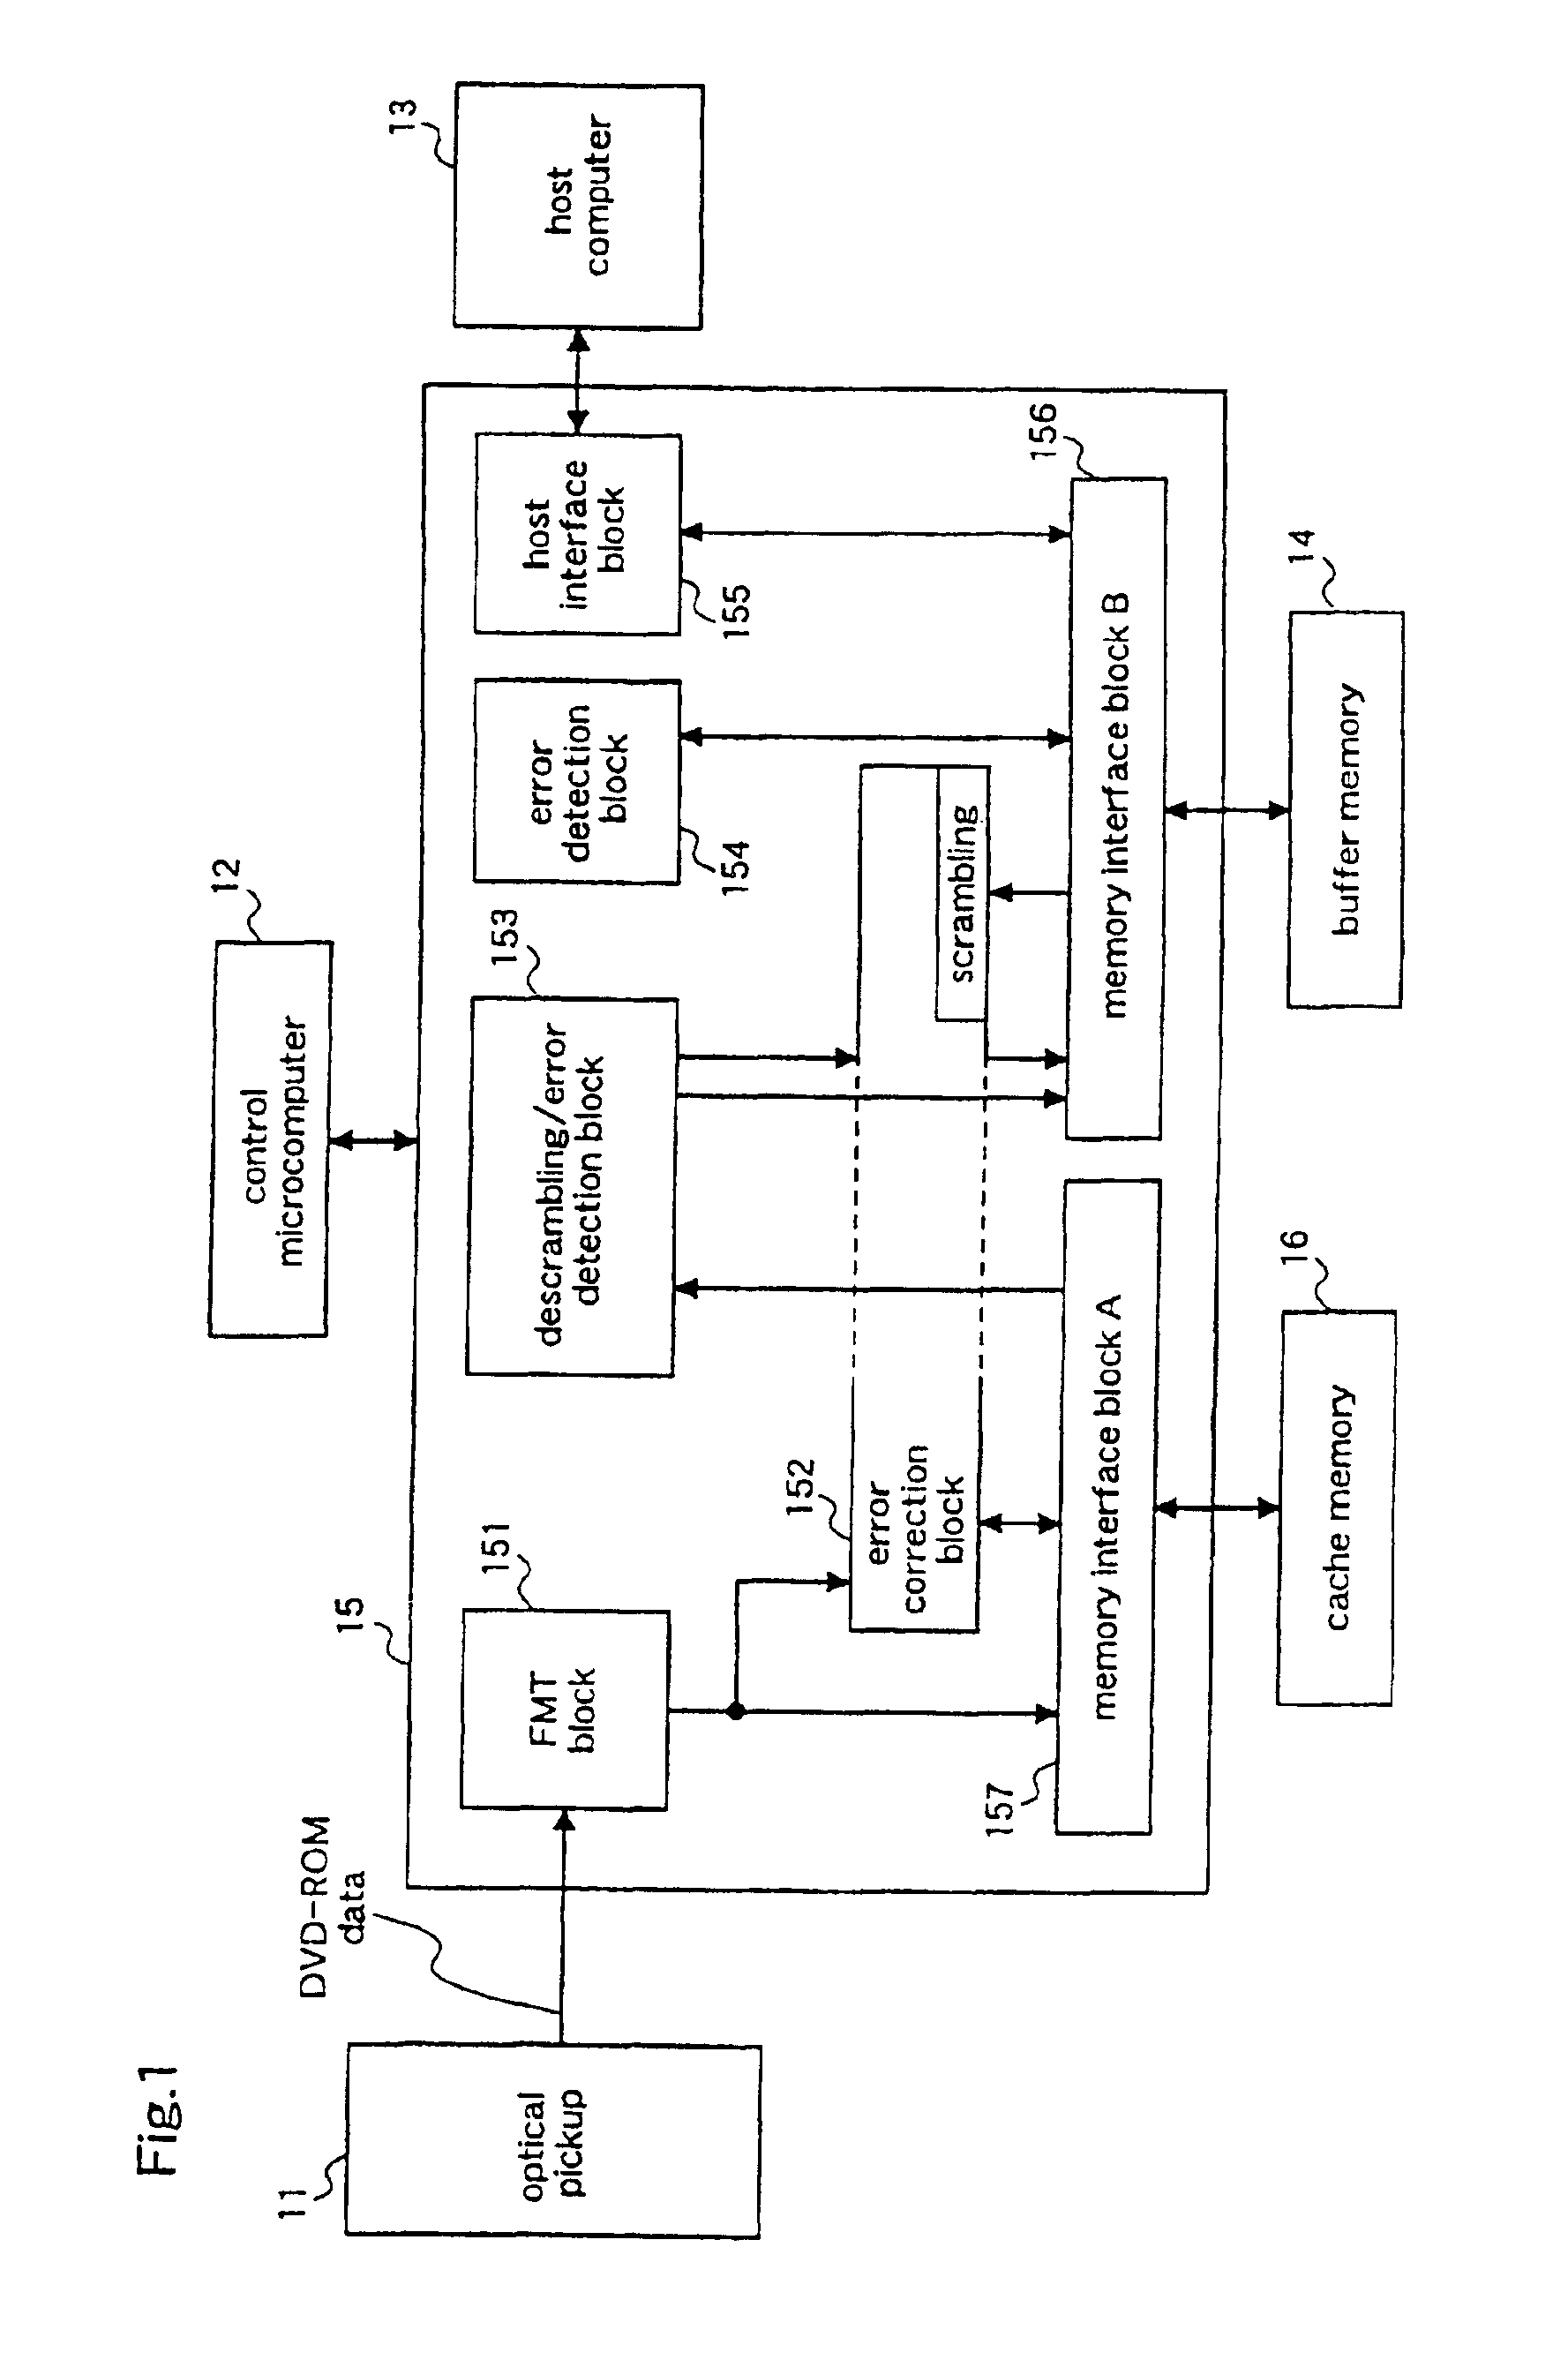 Signal processor for correcting and detecting errors